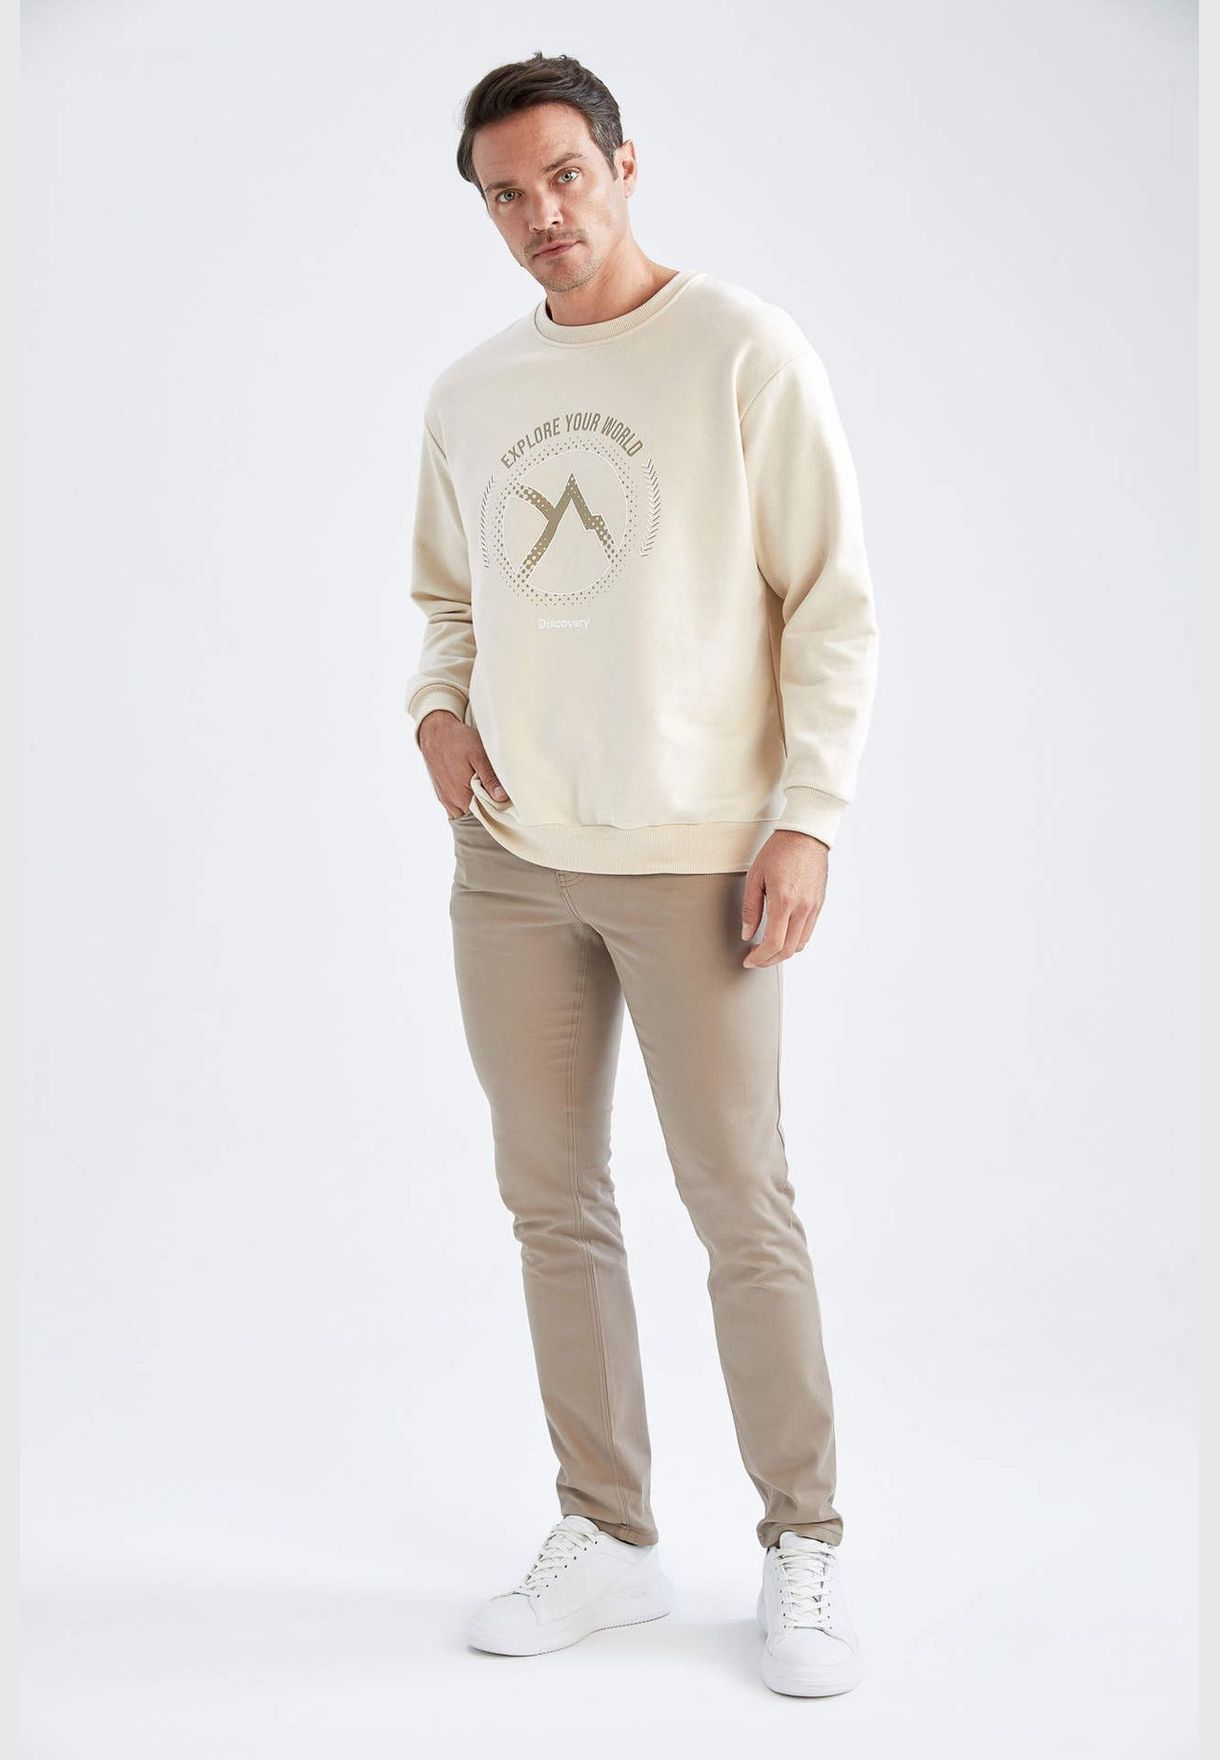 Man Discovery Licenced Oversize Fit Crew Neck Long Sleeve Knitted Sweat Shirt